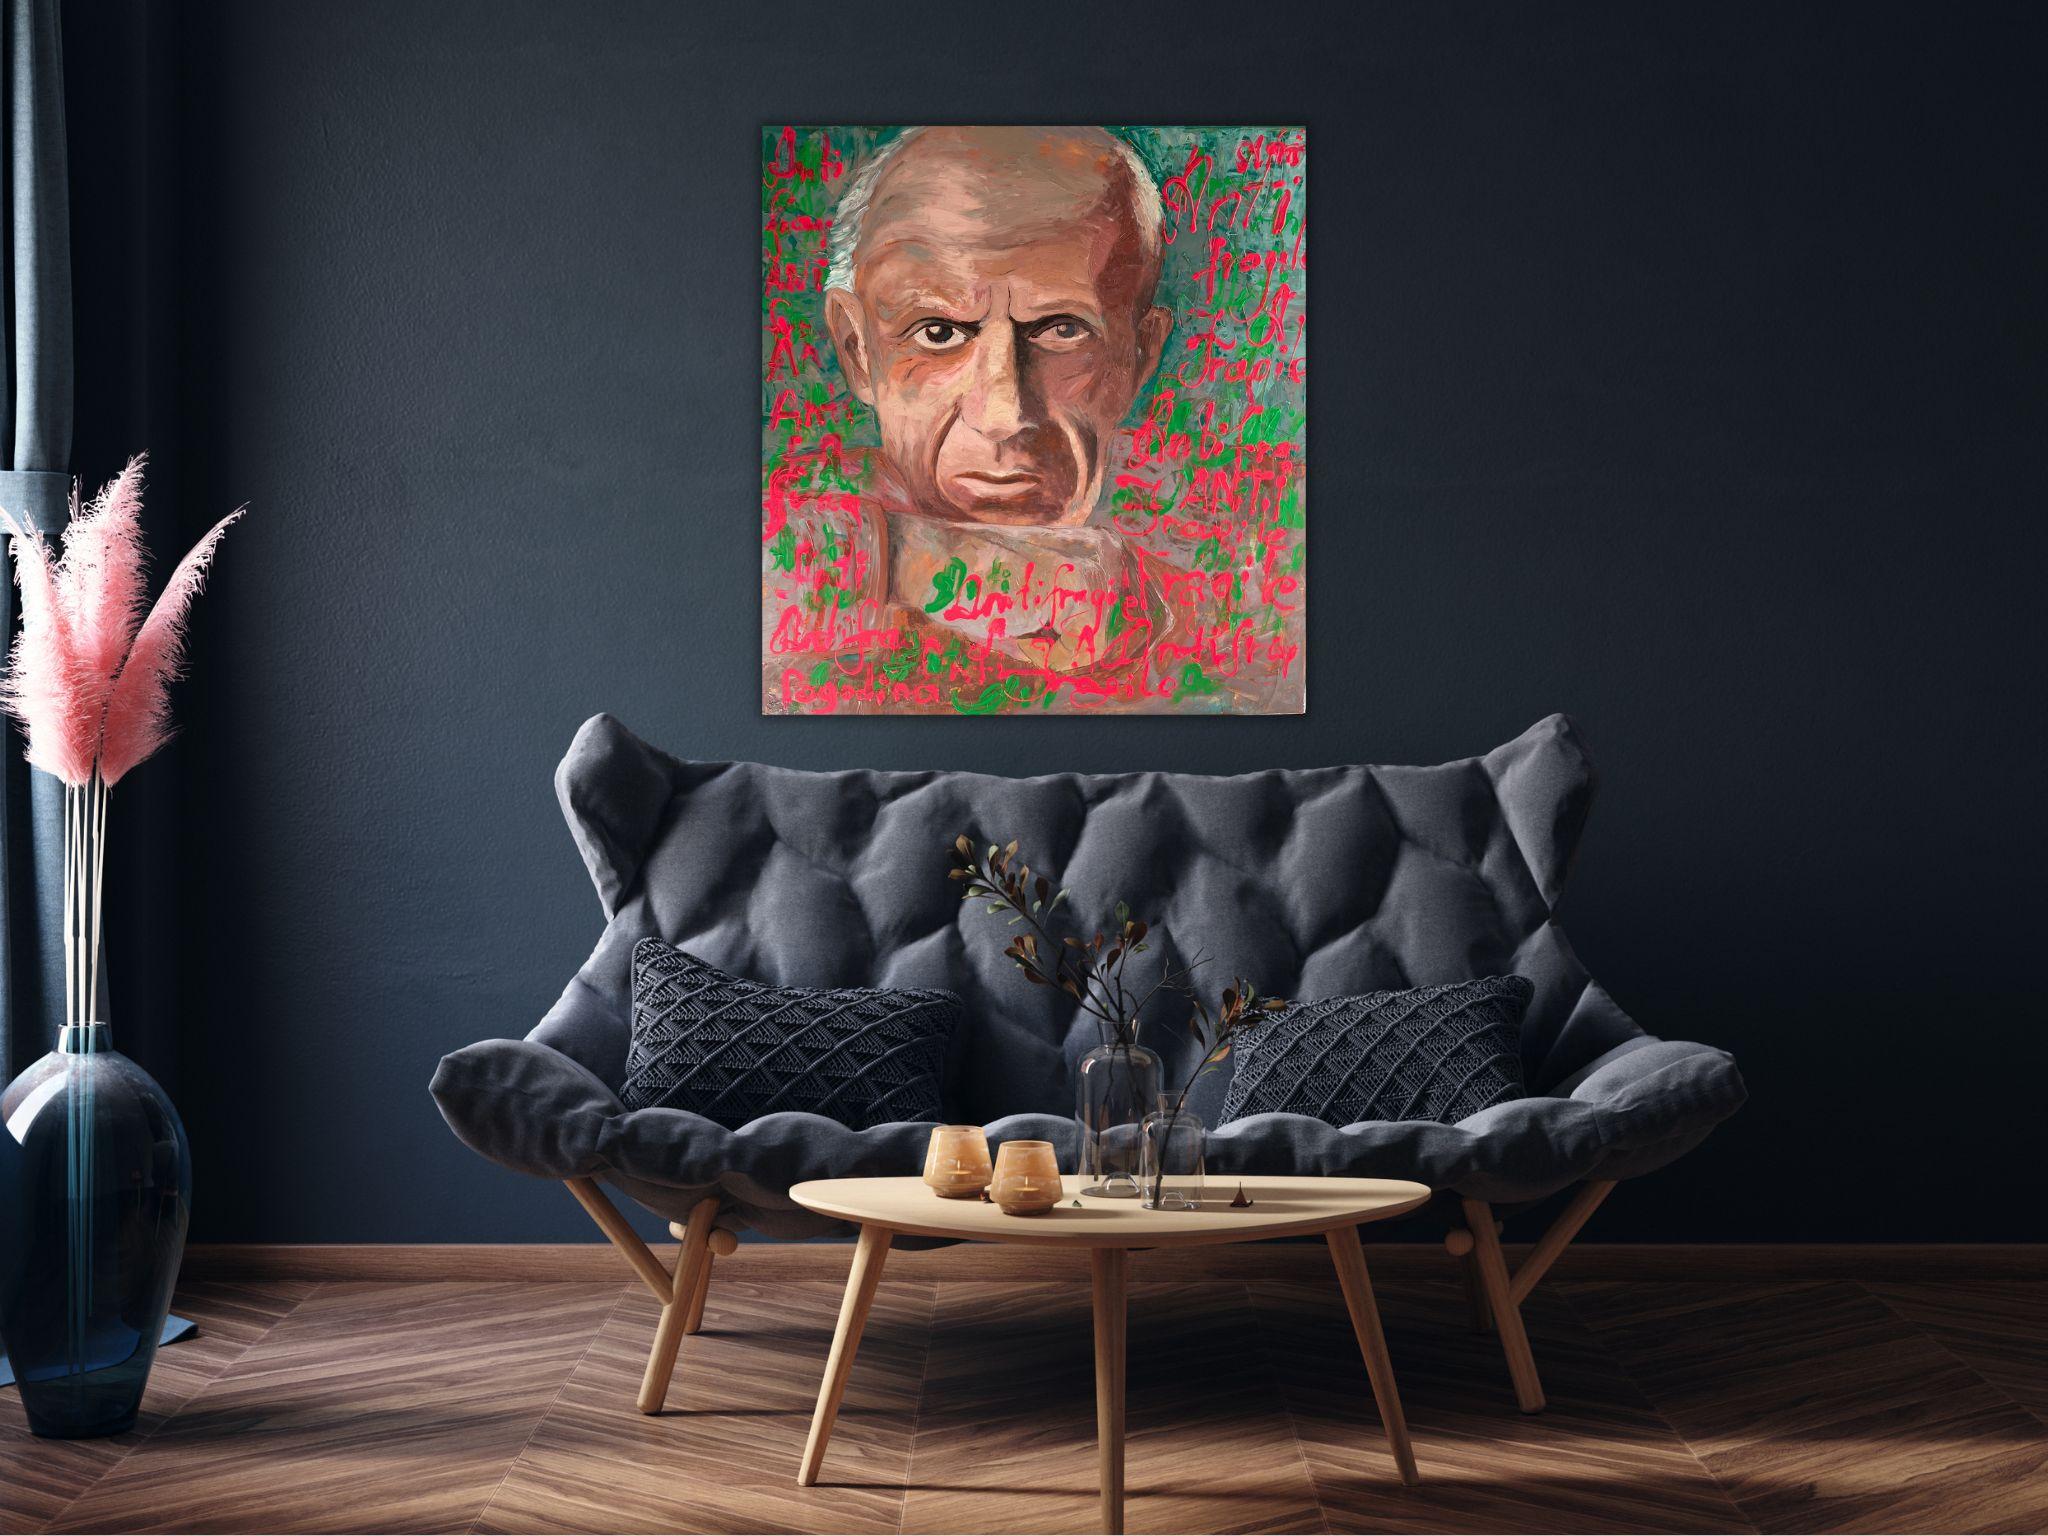 ABOUT THE ARTWORK

In the “ANTIFRAGILE” series, the artist presents the portrait “Pablo Picasso”, which stands as a vivid example of courage and confidence in one's individuality. This work explores the theme of self-identification and personal